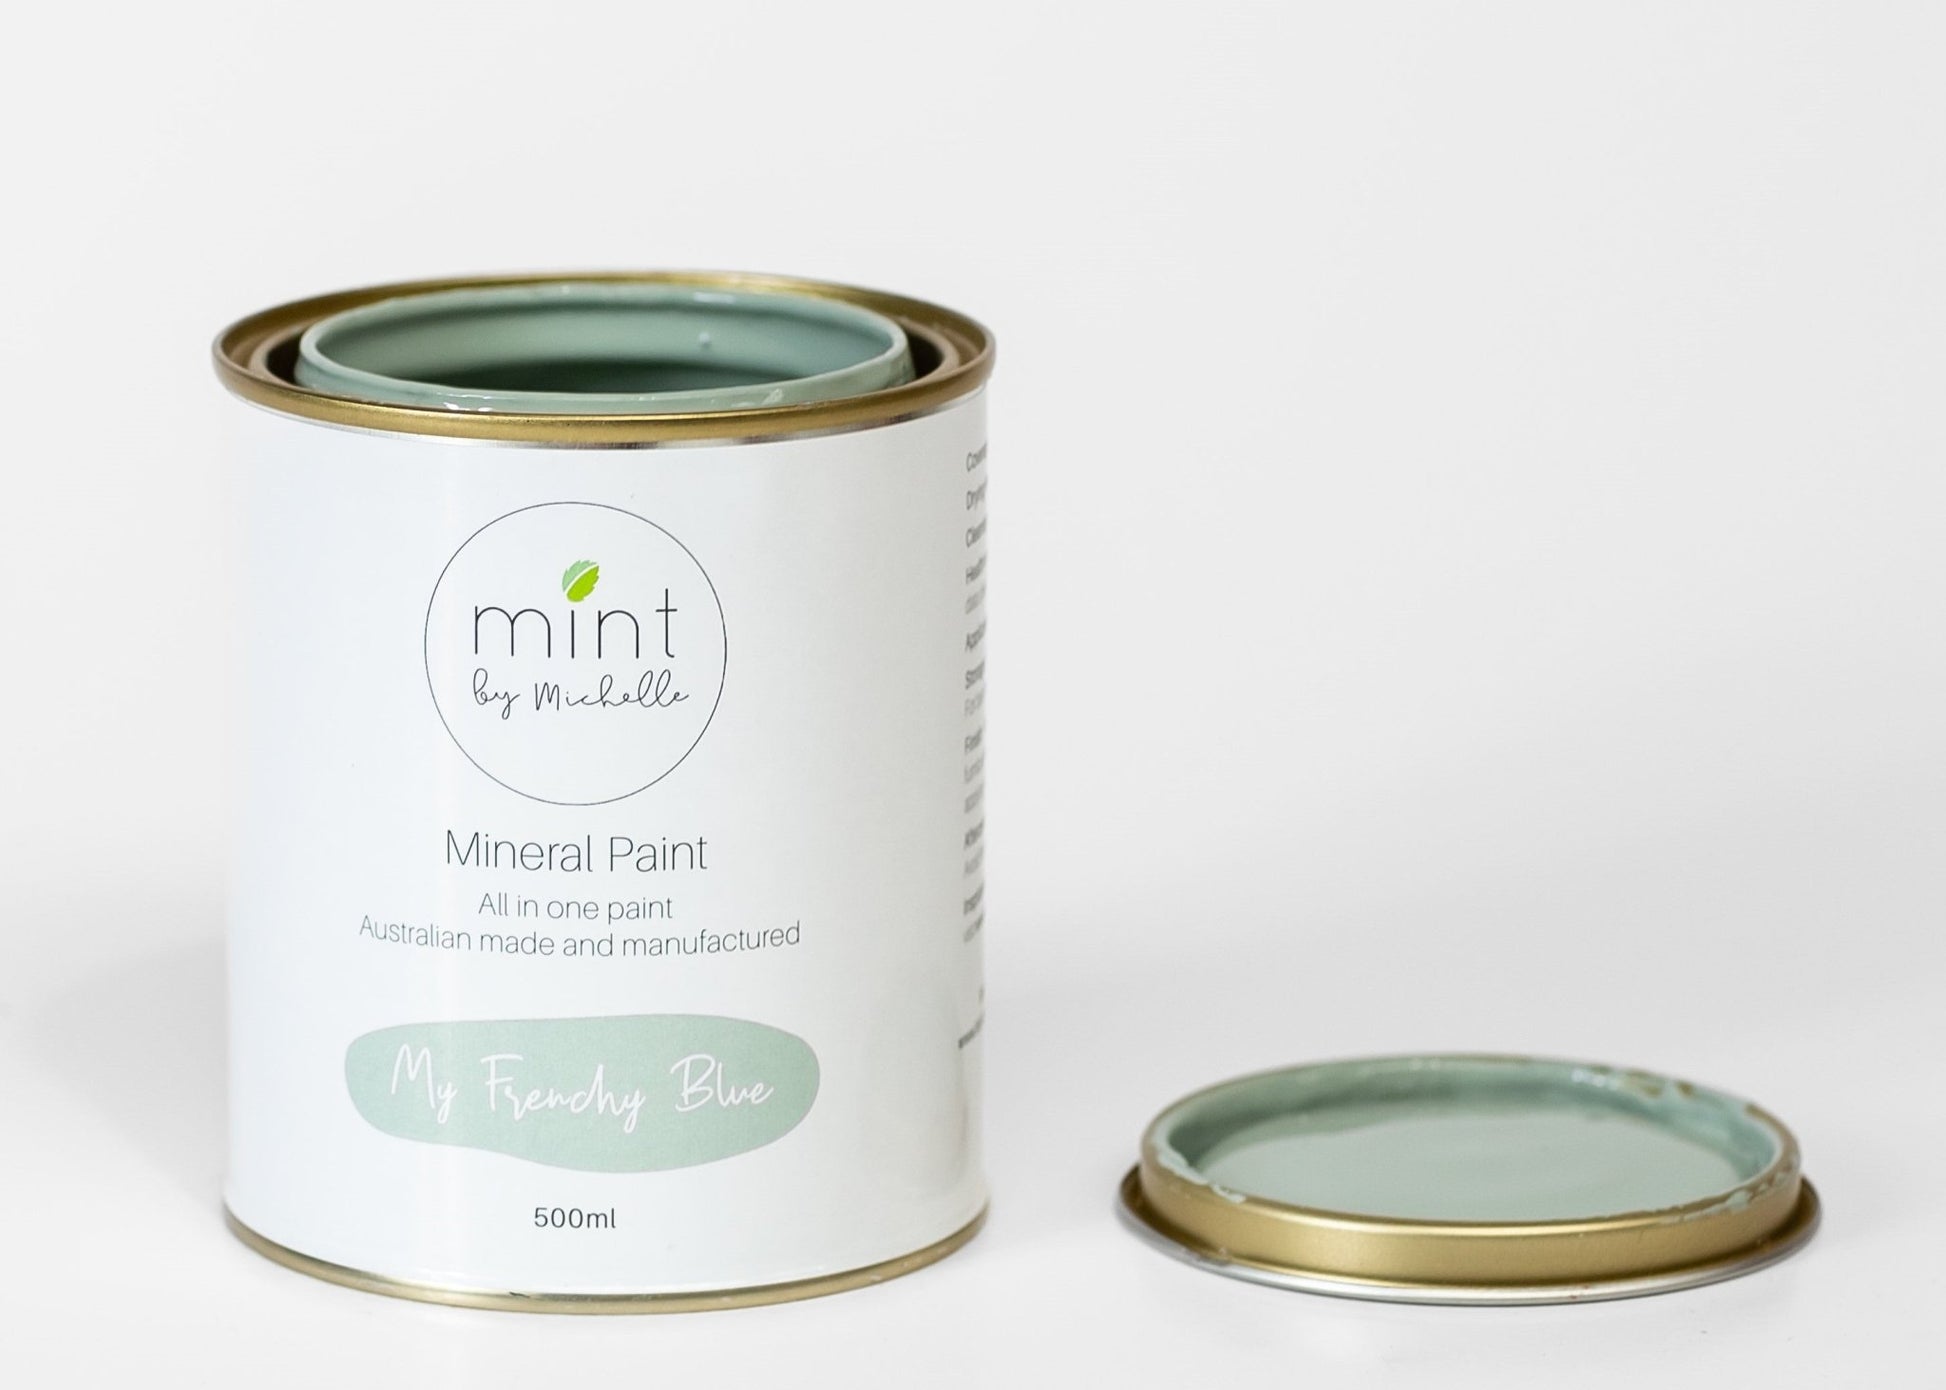 Mint Mineral Paint - My Frenchy Blue - 500ml - Rustic River Home